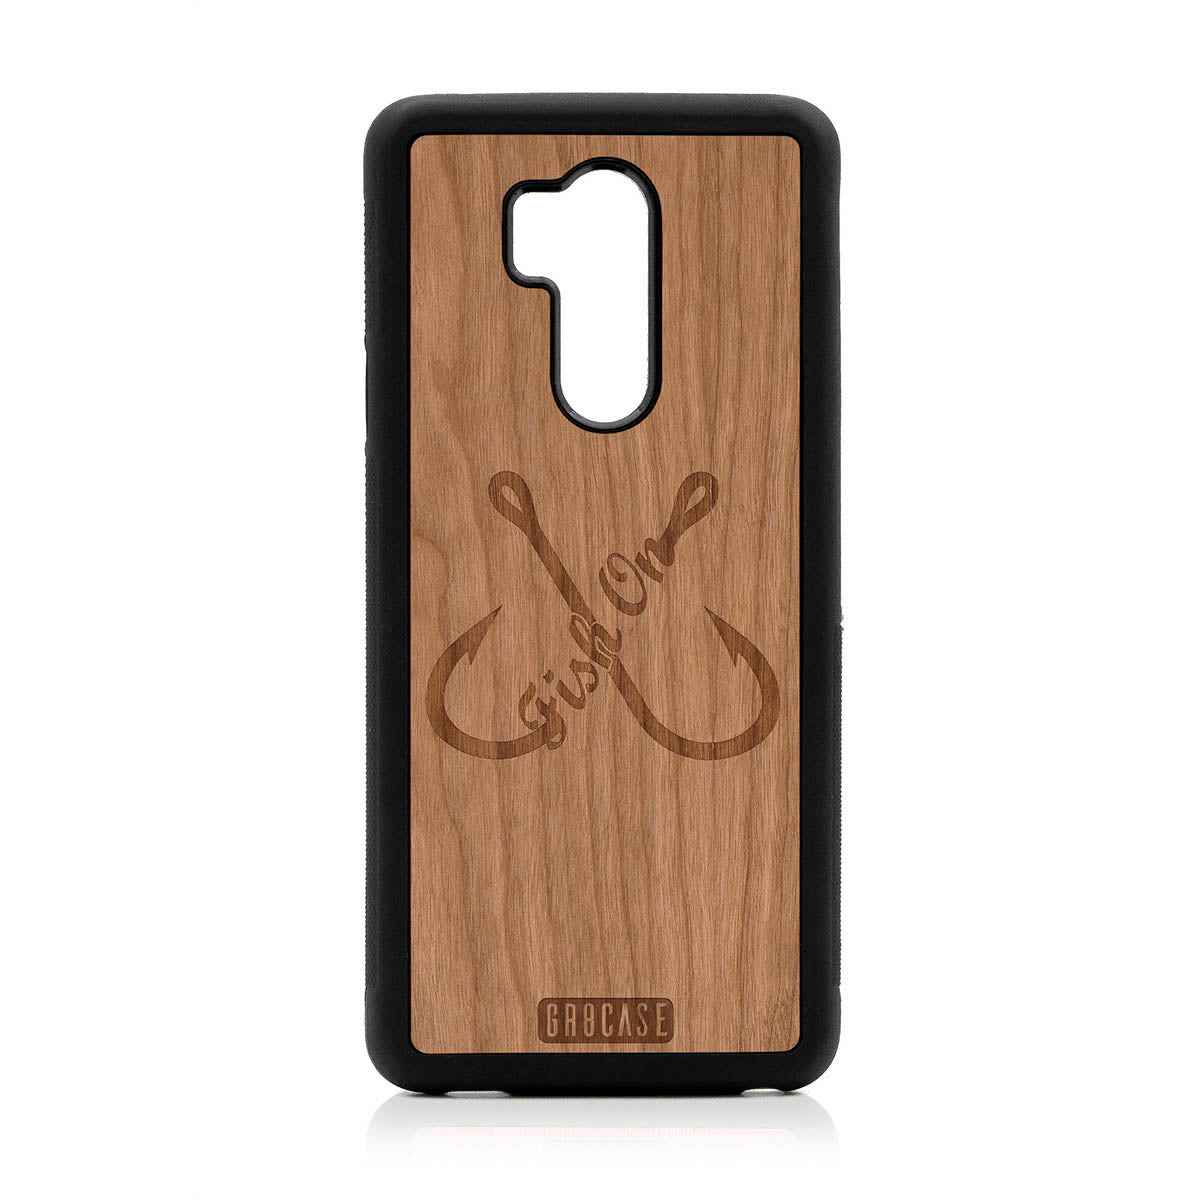 Fish On (Fish Hooks) Design Wood Case For LG G7 ThinQ by GR8CASE